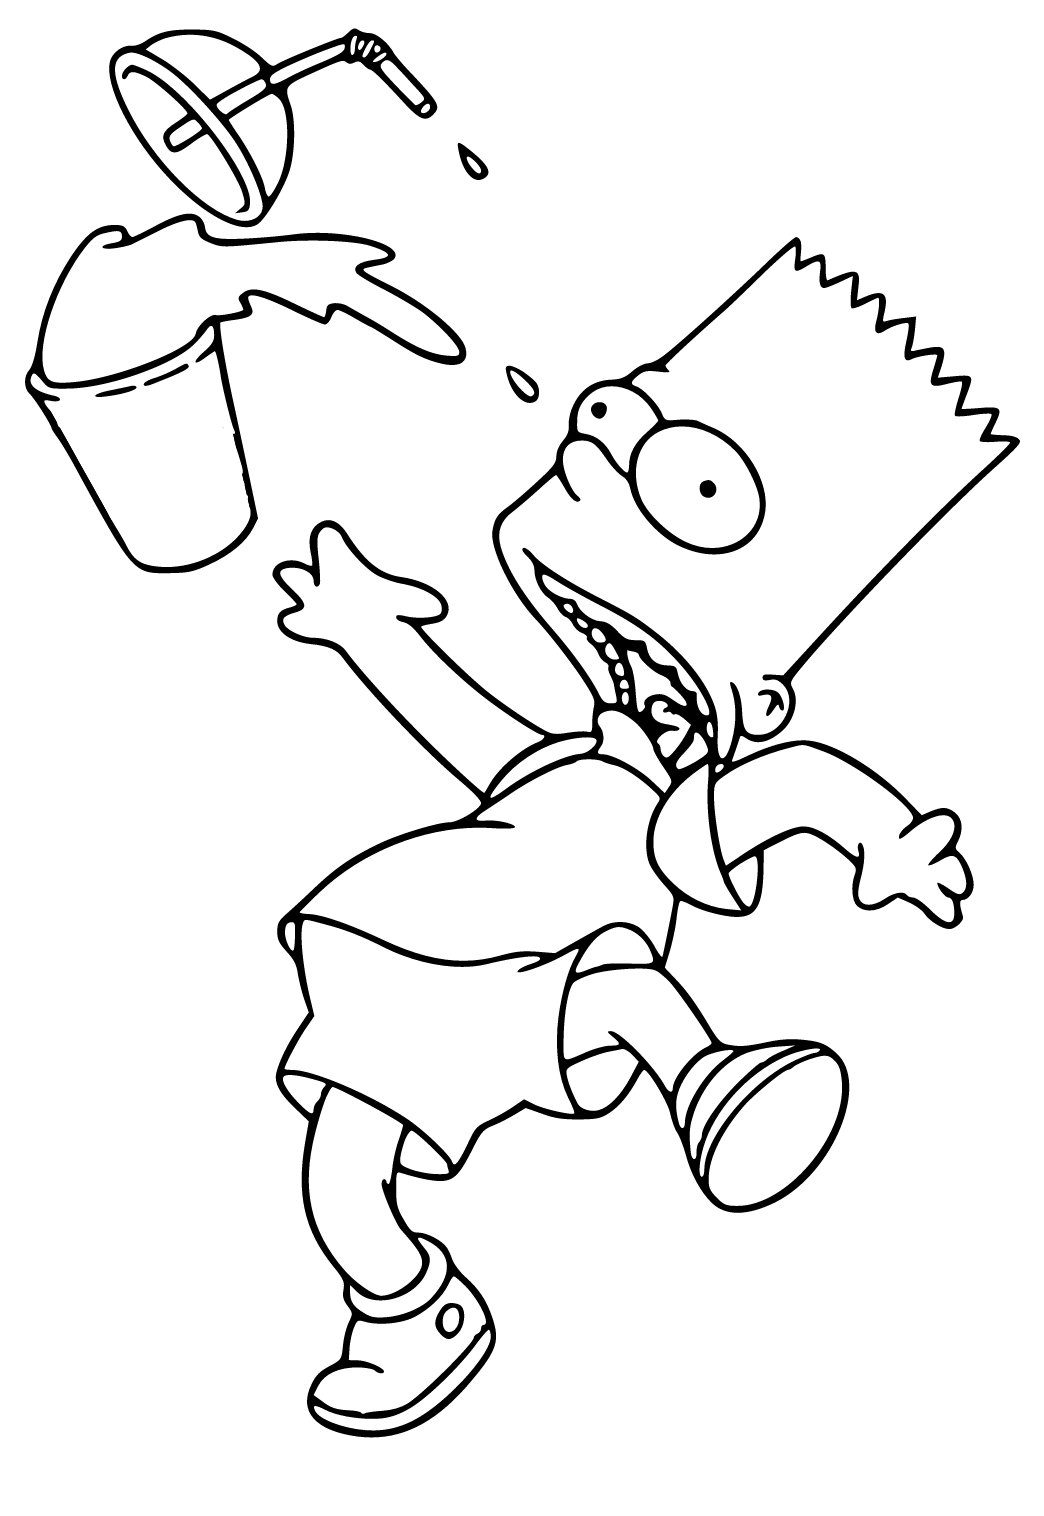 Free printable bart simpson cocktail coloring page sheet and picture for adults and kids girls and boys